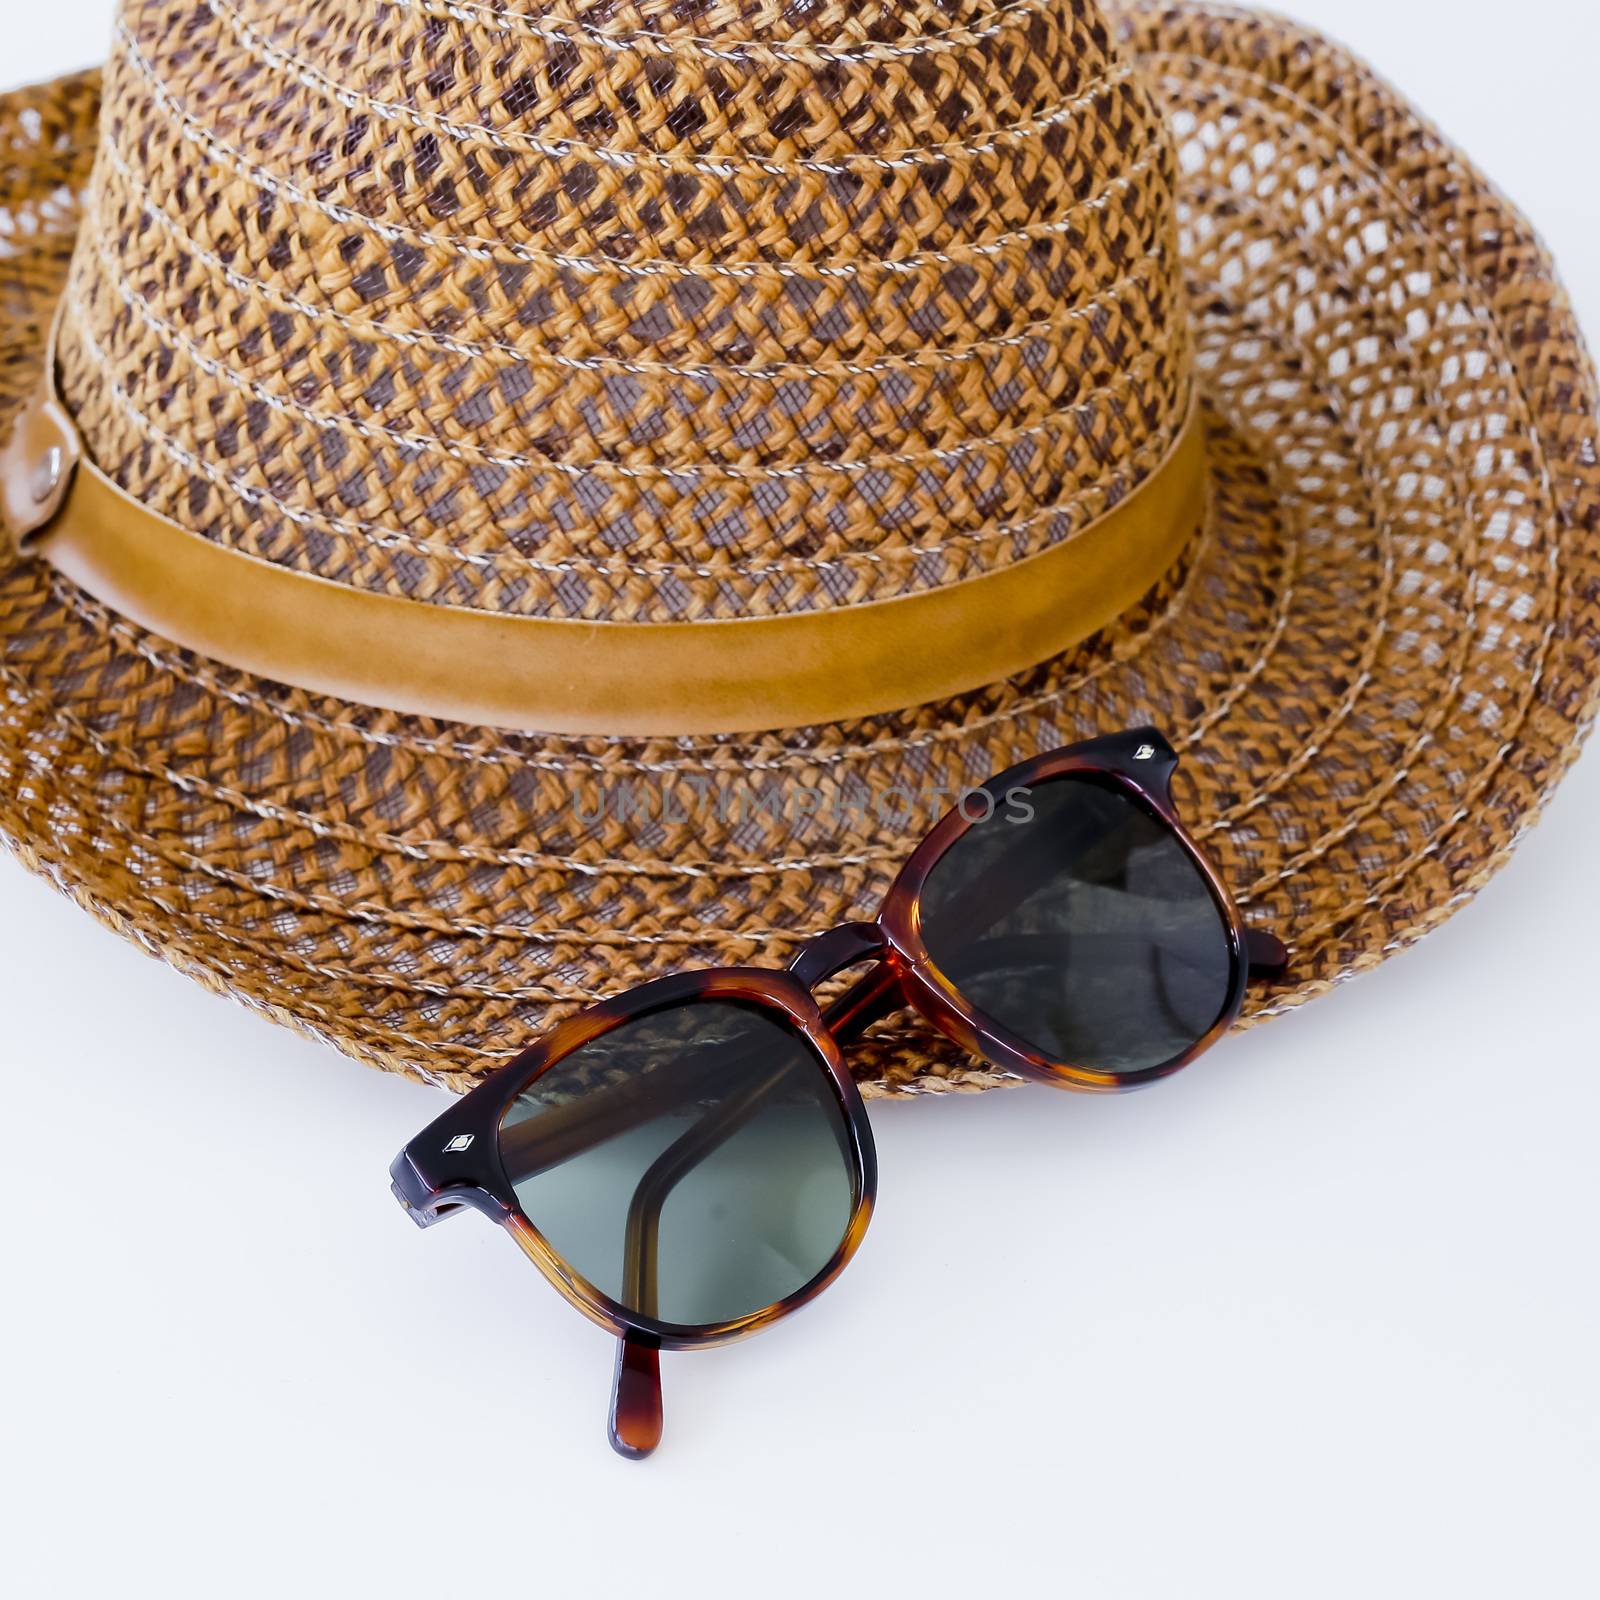 sunprotection objects sunglasses and hat